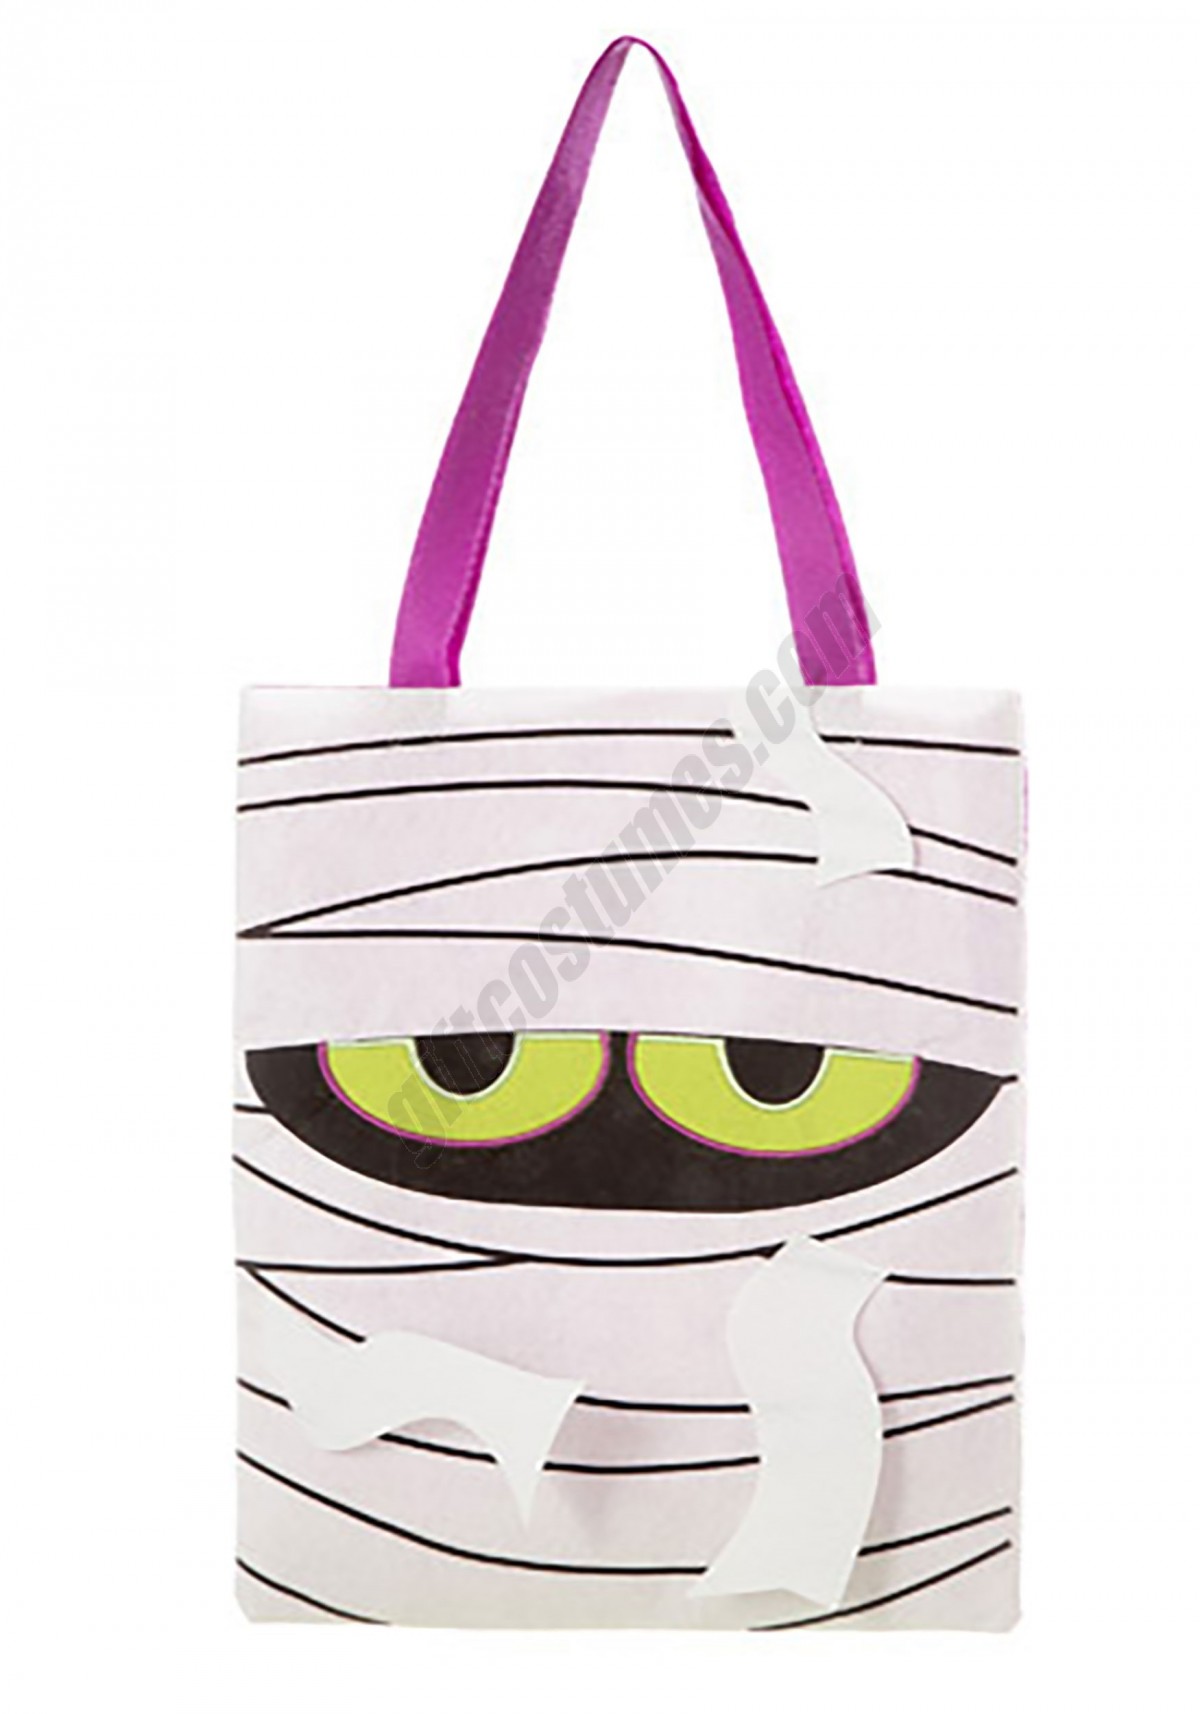 Mummy Tote Bag Promotions - -0